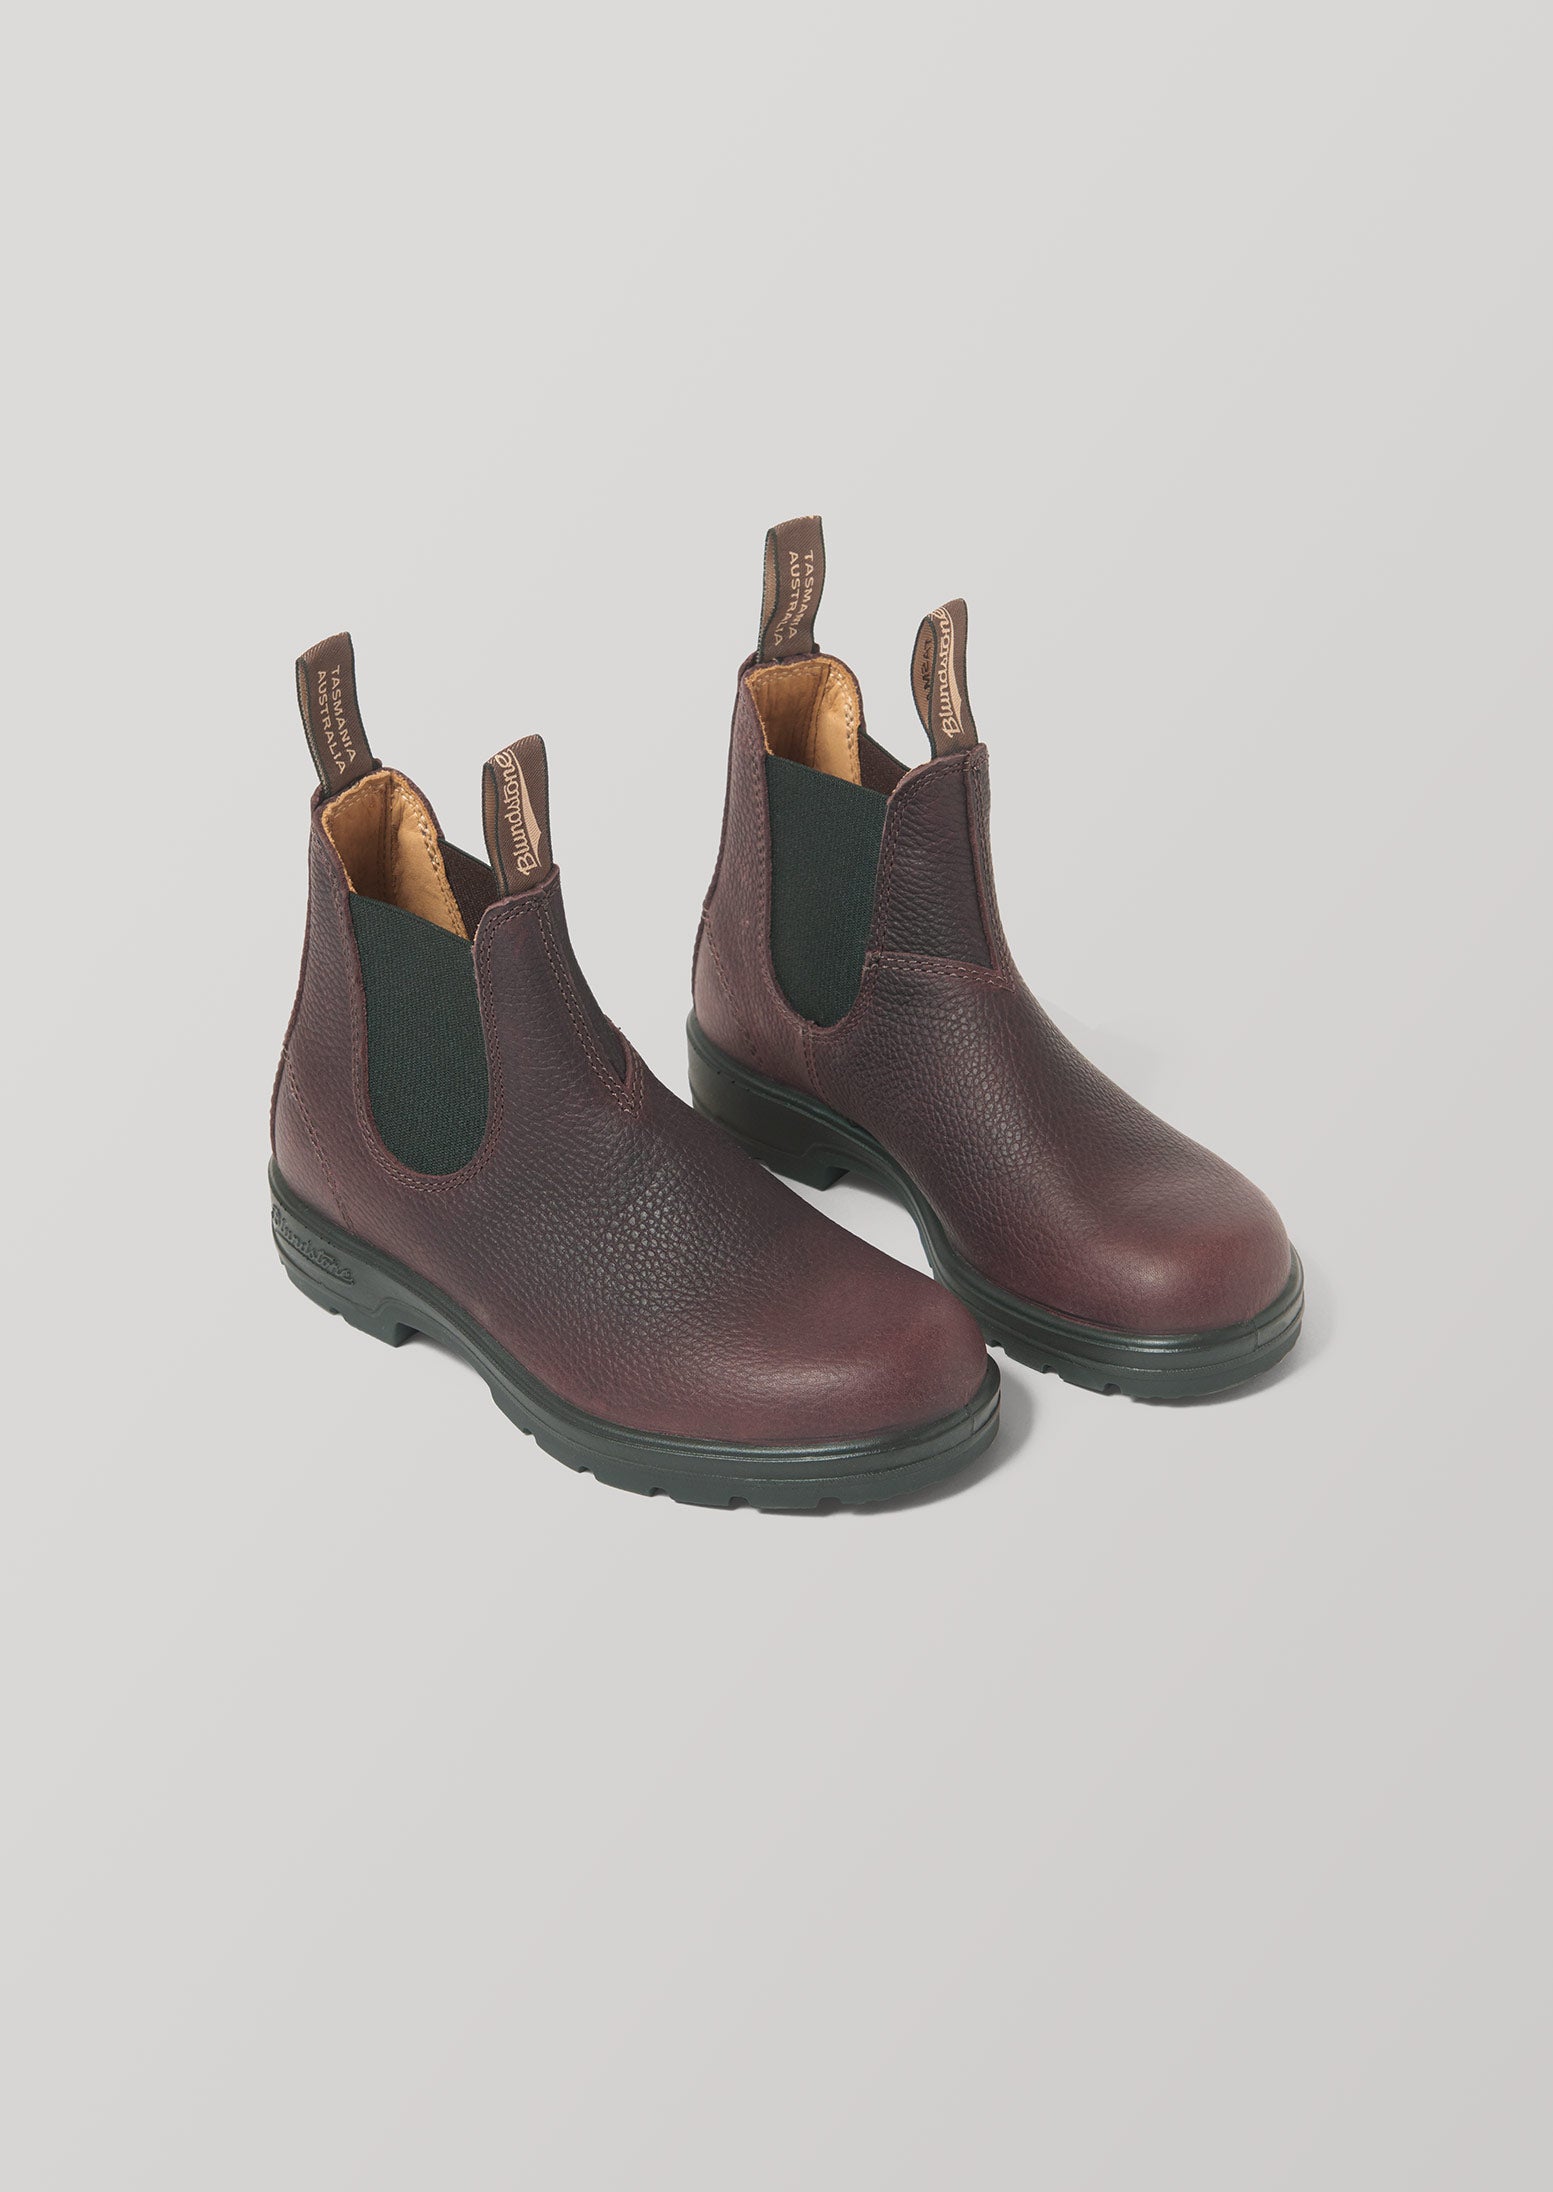 Blundstone Leather Boots | | TOAST